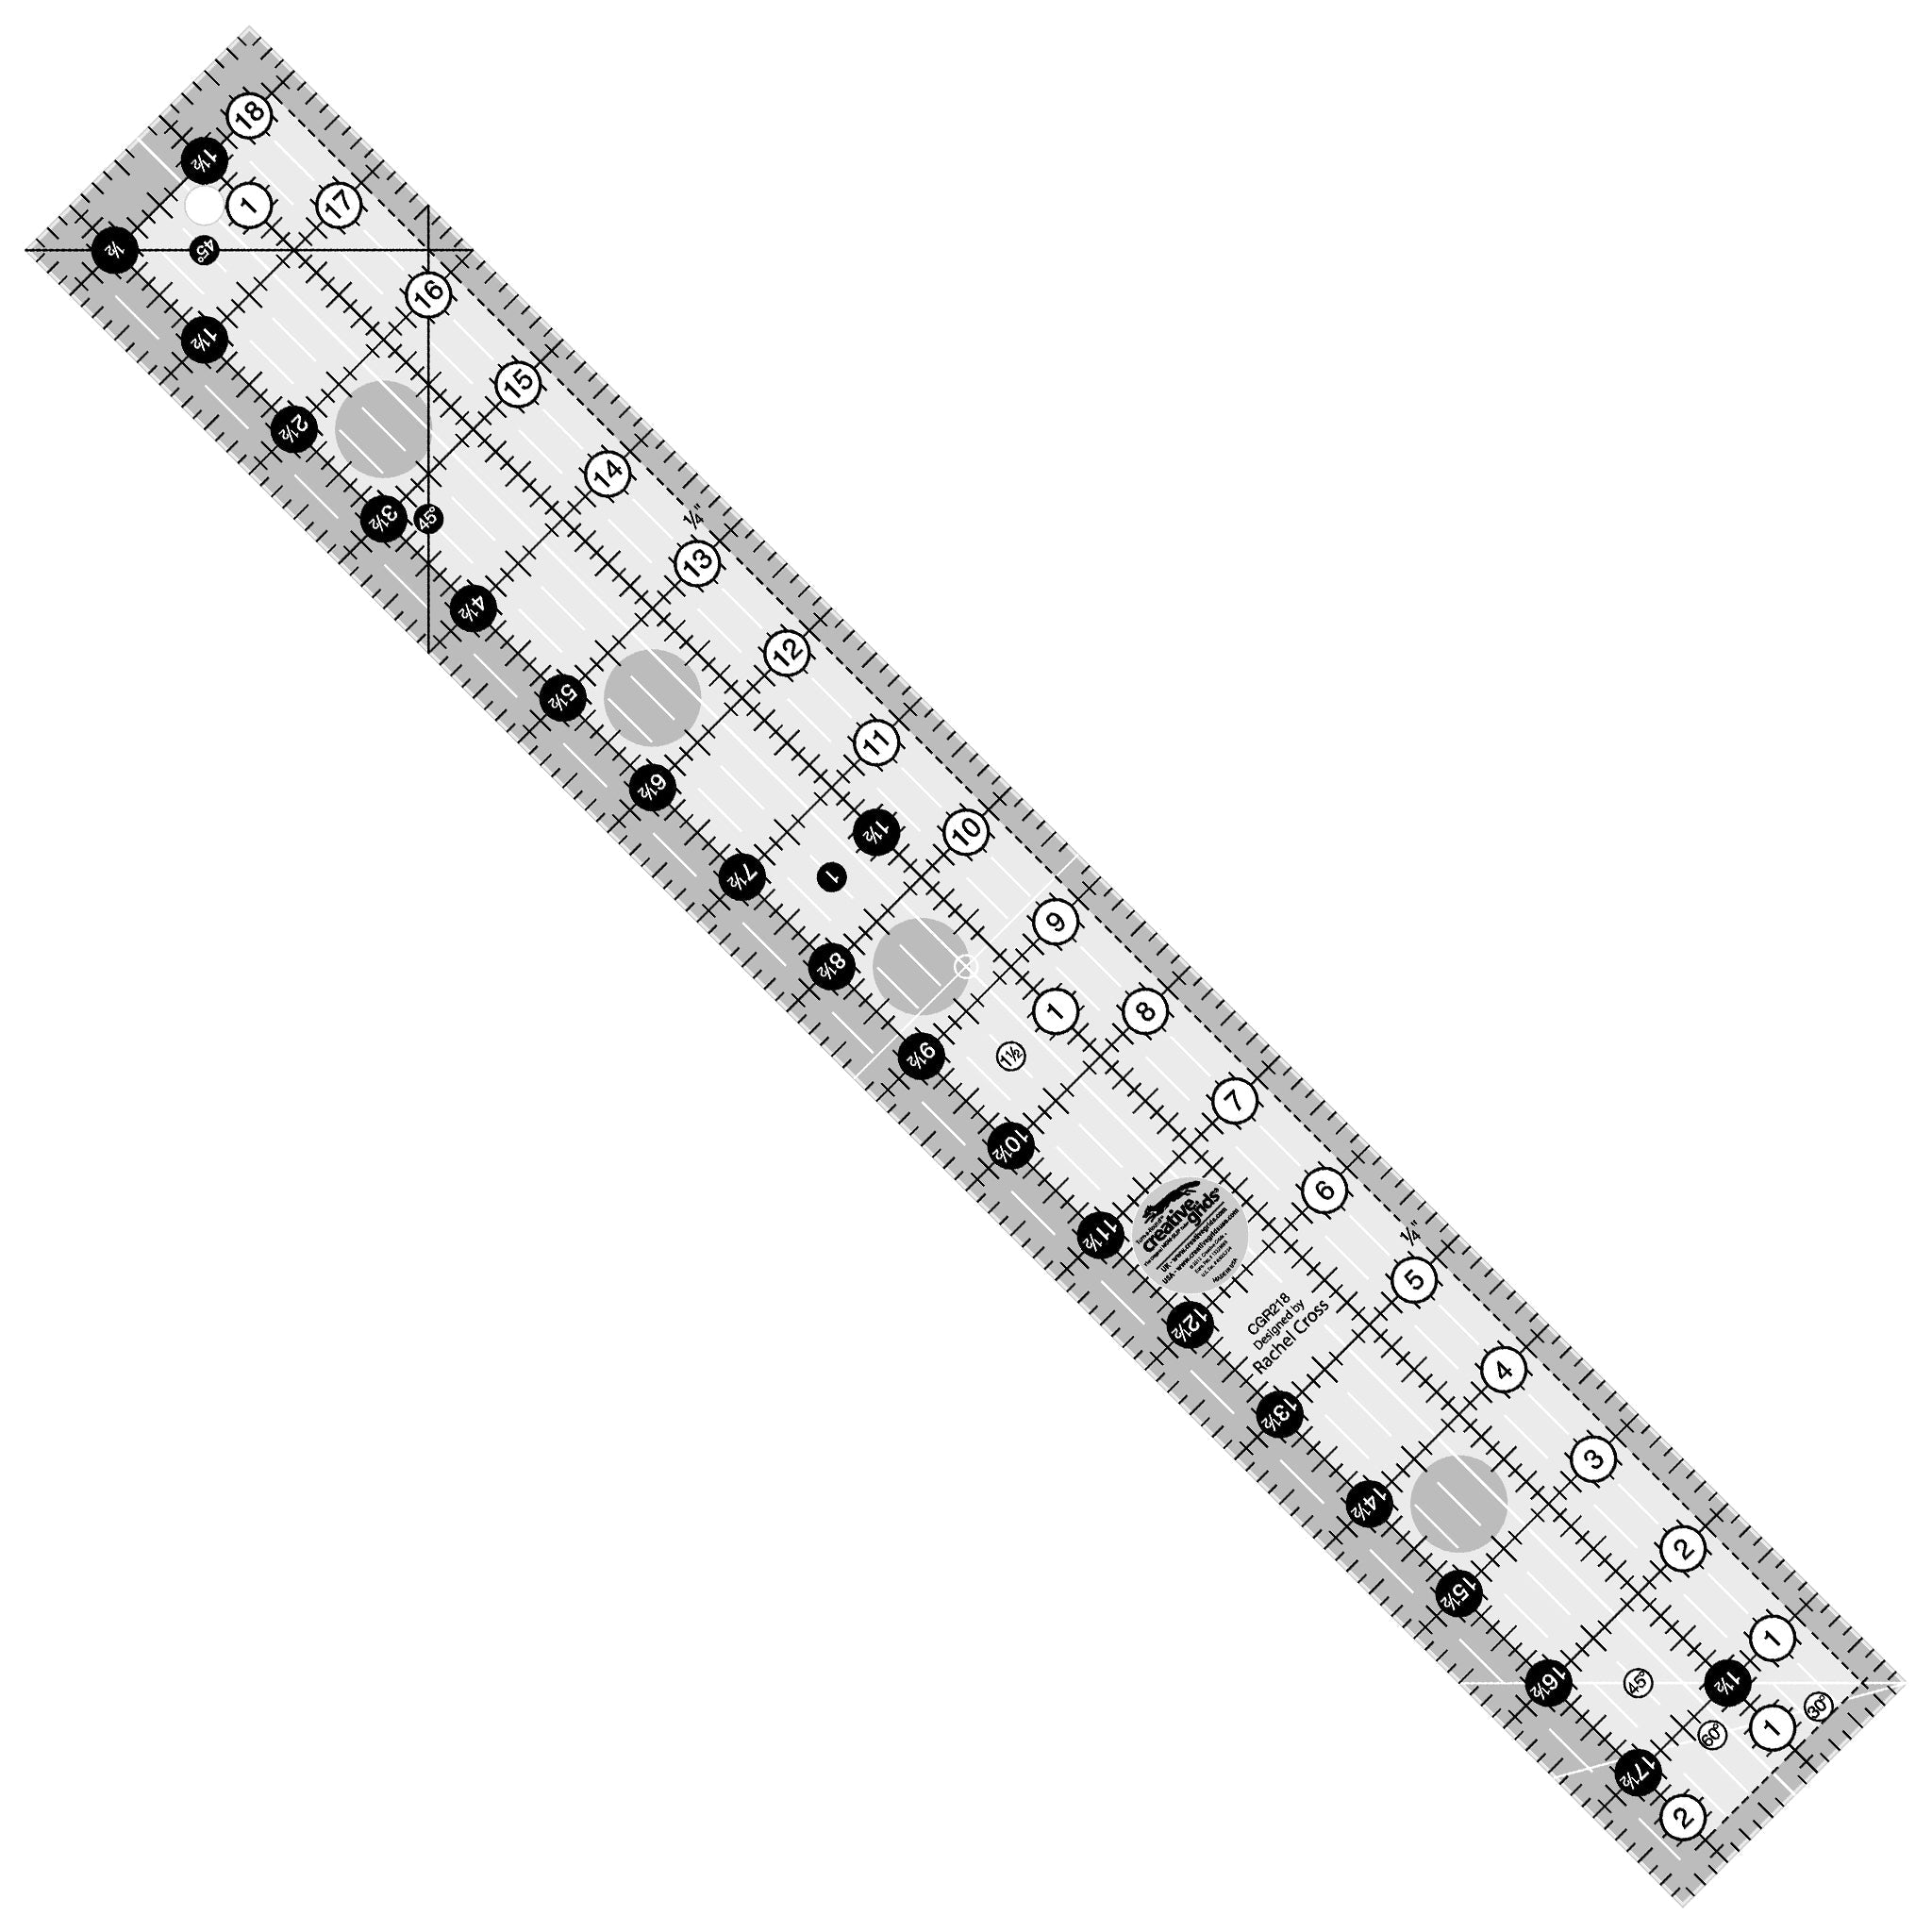 Creative Grids 2-1/2-Inch X 18-1/2-Inch Quilt Ruler (CGR218)